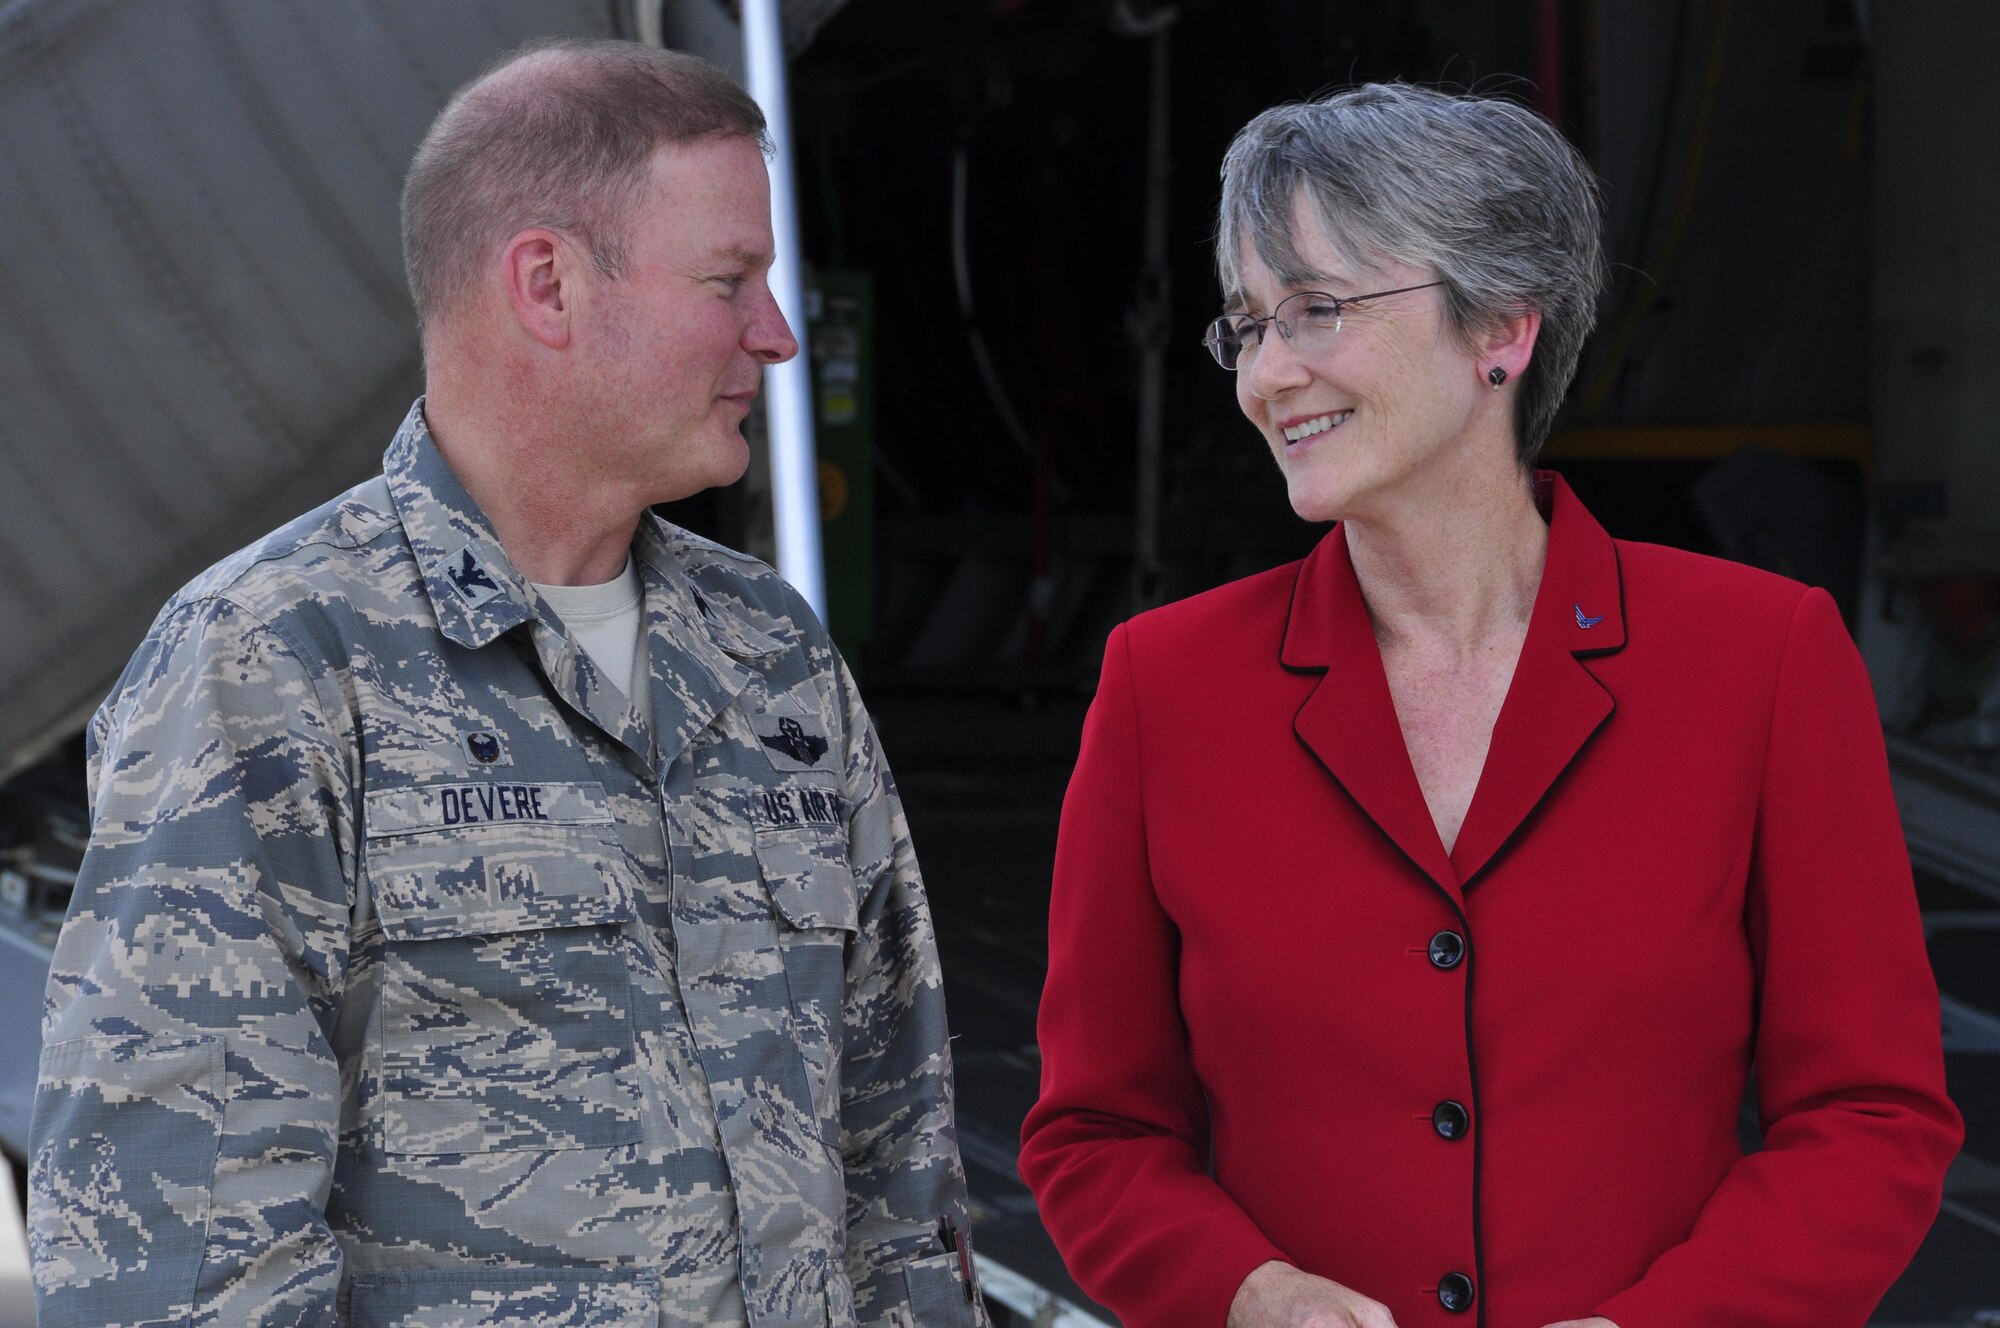 Col. James DeVere, 302nd Airlift Wing commander, talks with Secretary of the Air Force Heather Wilson on the Peterson Air Force Base, Colo. flightline during her visit, May 22, 2017.  DeVere briefed Wilson on several of the Reserve wing’s missions before the secretary had the opportunity to view up-close a portable U.S. Forest Service Modular Airborne Fire Fighting System used during 302nd AW C-130 MAFFS missions and meet with Reserve Citizen Airmen from the wing’s 34th Aeromedical Evacuation Squadron, 302nd Security Forces Squadron and 302nd Operations Group. Peterson AFB was the first official base visit for Wilson as Secretary of the Air Force. (U.S. Air Force photo/Staff Sgt. Frank Casciotta)